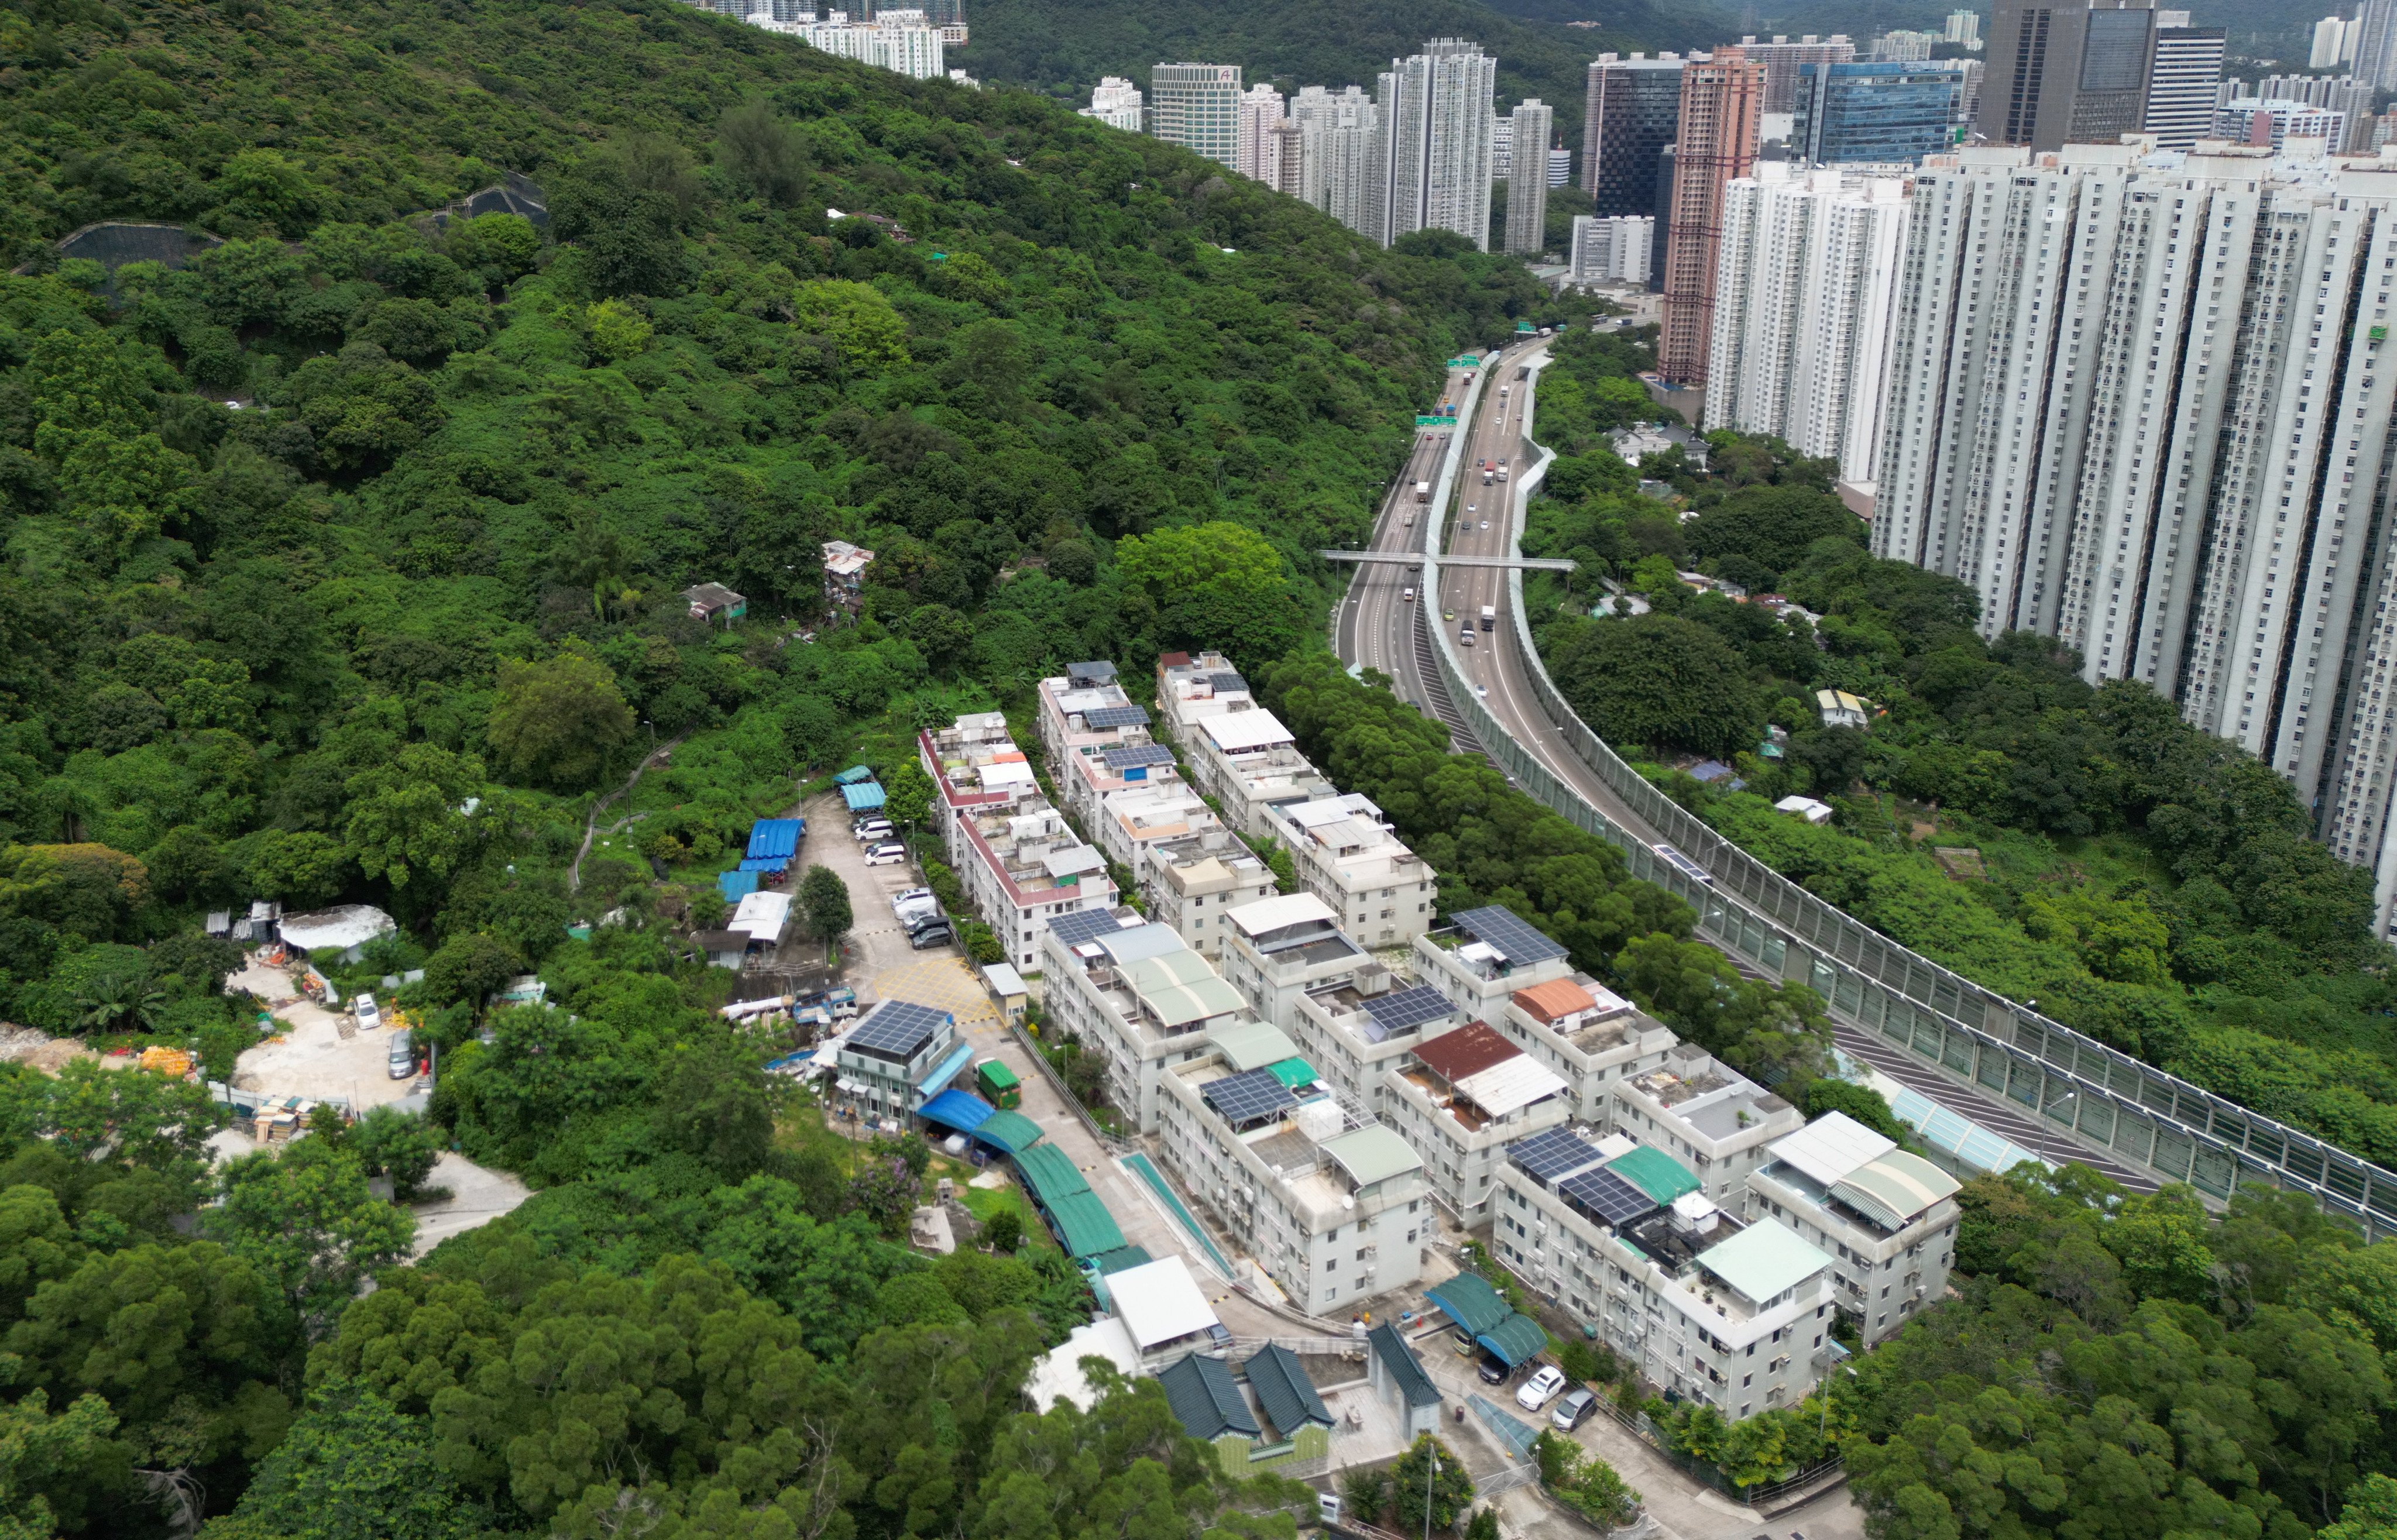 A view of the village houses at Yau Kom Tau, Tsuen Wan. Hong Kong faces a challenging fiscal situation as government revenue from land and other sources suffers. Several sales of residential sites, including at Yau Kom Tau, have failed this year. Photo: Dickson Lee